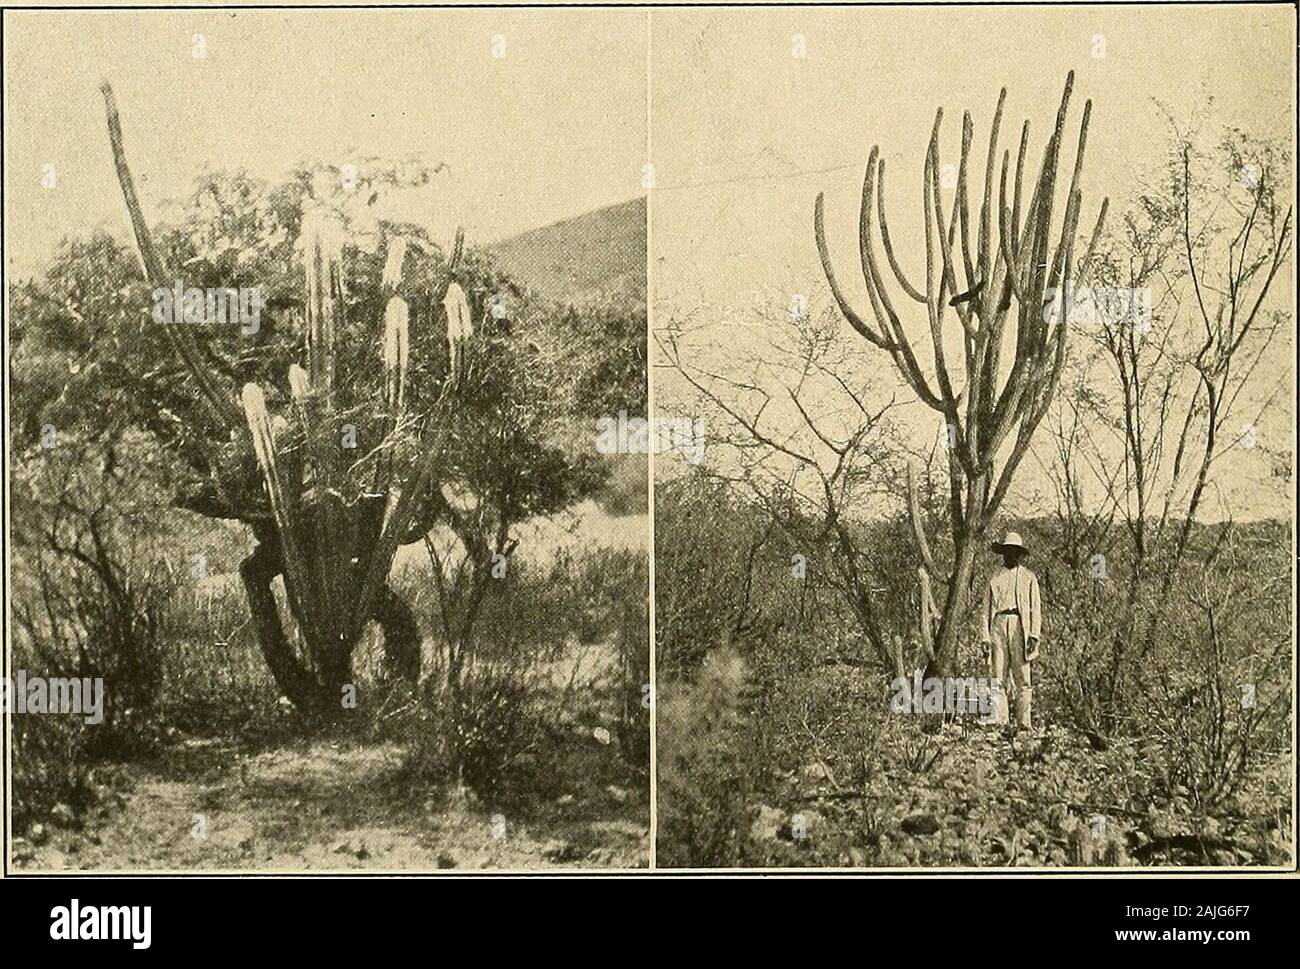 The Cactaceae : descriptions and illustrations of plants of the cactus family . the flesh red; seeds black. Type locality: Near Tehuacan, Mexico. Distribution: Puebla and Oaxaca, Mexico. Illustration: MacDougal, Bot. N. Amer. Des. pi. 17, in part, as Pilocereus chrysacanthus;Mollers Deutsche Gart. Zeit. 29: 356. f. 12. Plate vii, figure 2, is from a photograph taken by Dr. MacDougal near Esperanza,Mexico, in 1906. 31. Cephalocereus maxonii Rose, Contr. U. S. Nat. Herb. 12: 417. 1909. Cereus maxonii Vaupel, Monatsschr. Kakteenk. 23: 23. 1913.Plant 2 to 3 meters high, with few long branches, ere Stock Photo